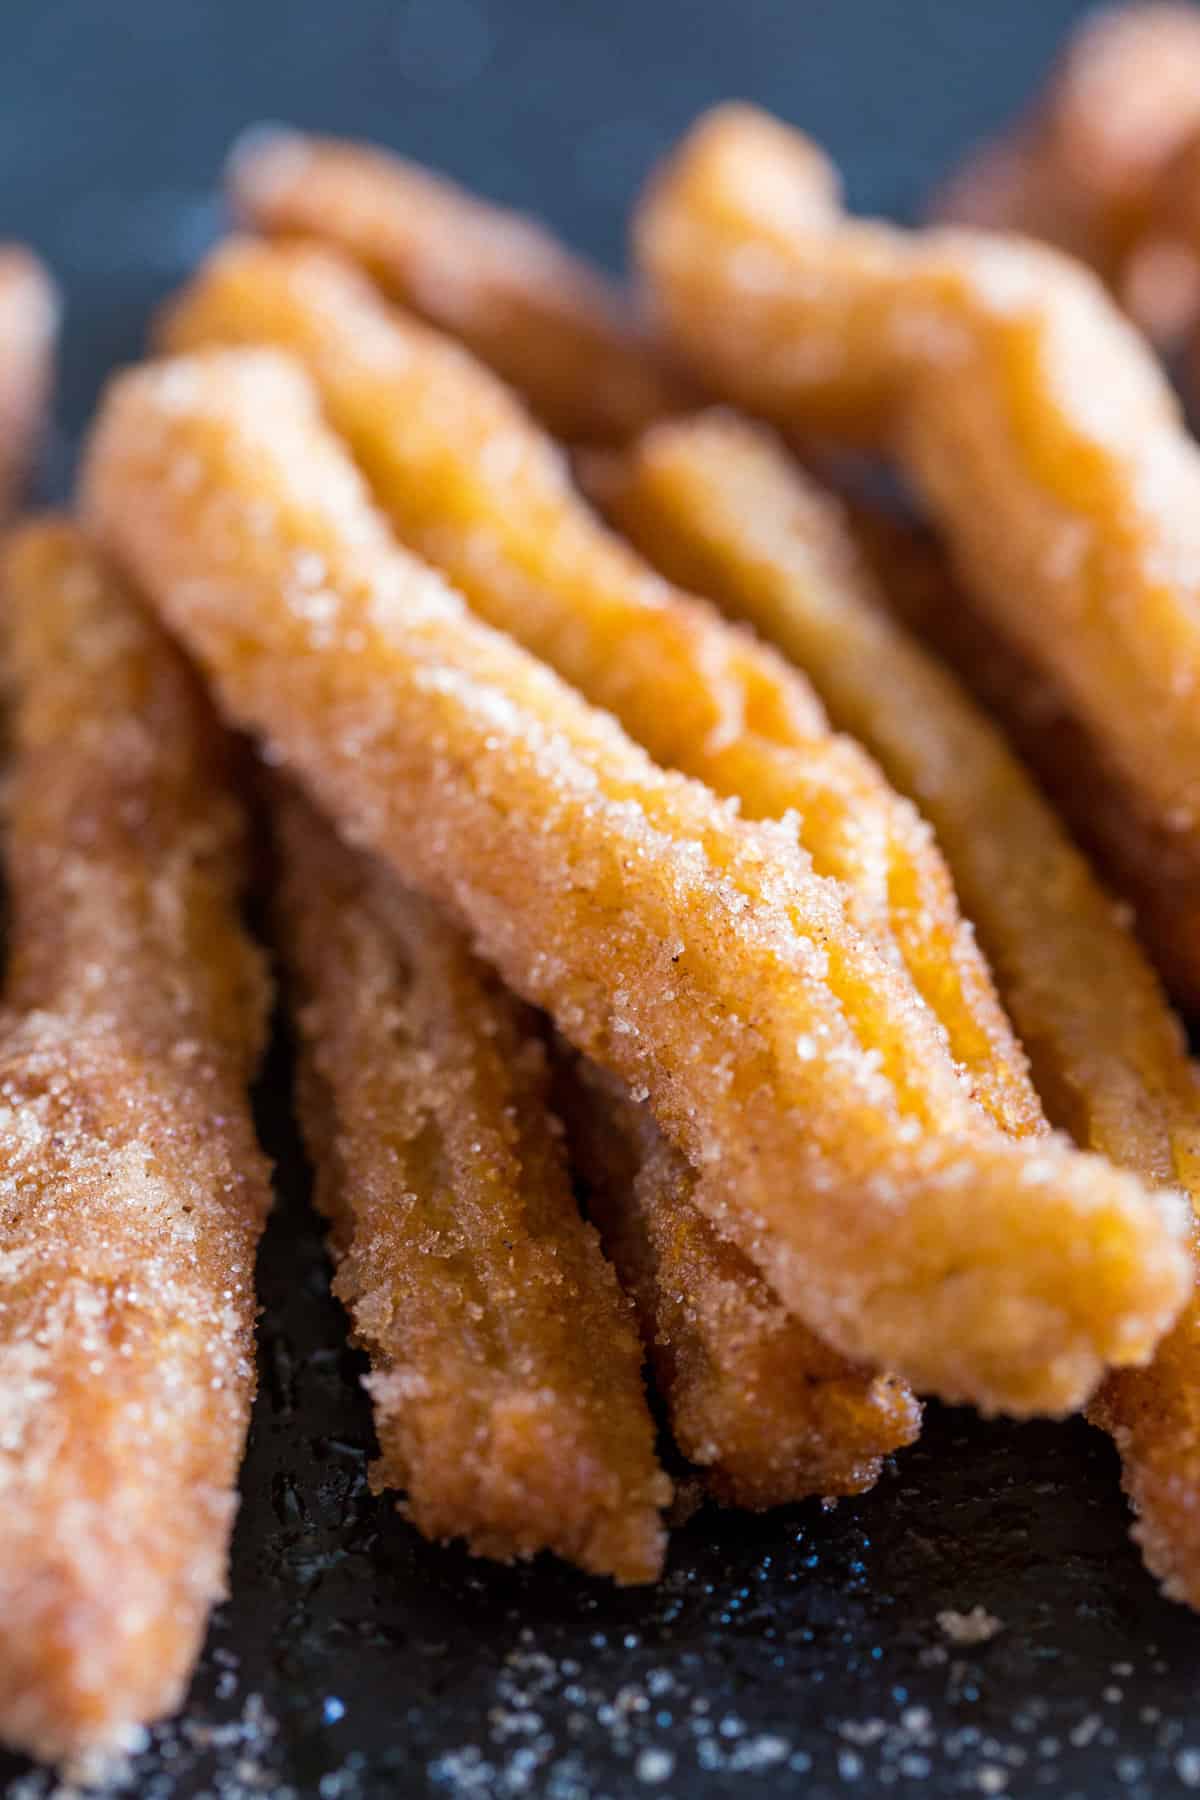 Homemade Mexican Churros Recipe with Dipping Sauces | Wanderzest